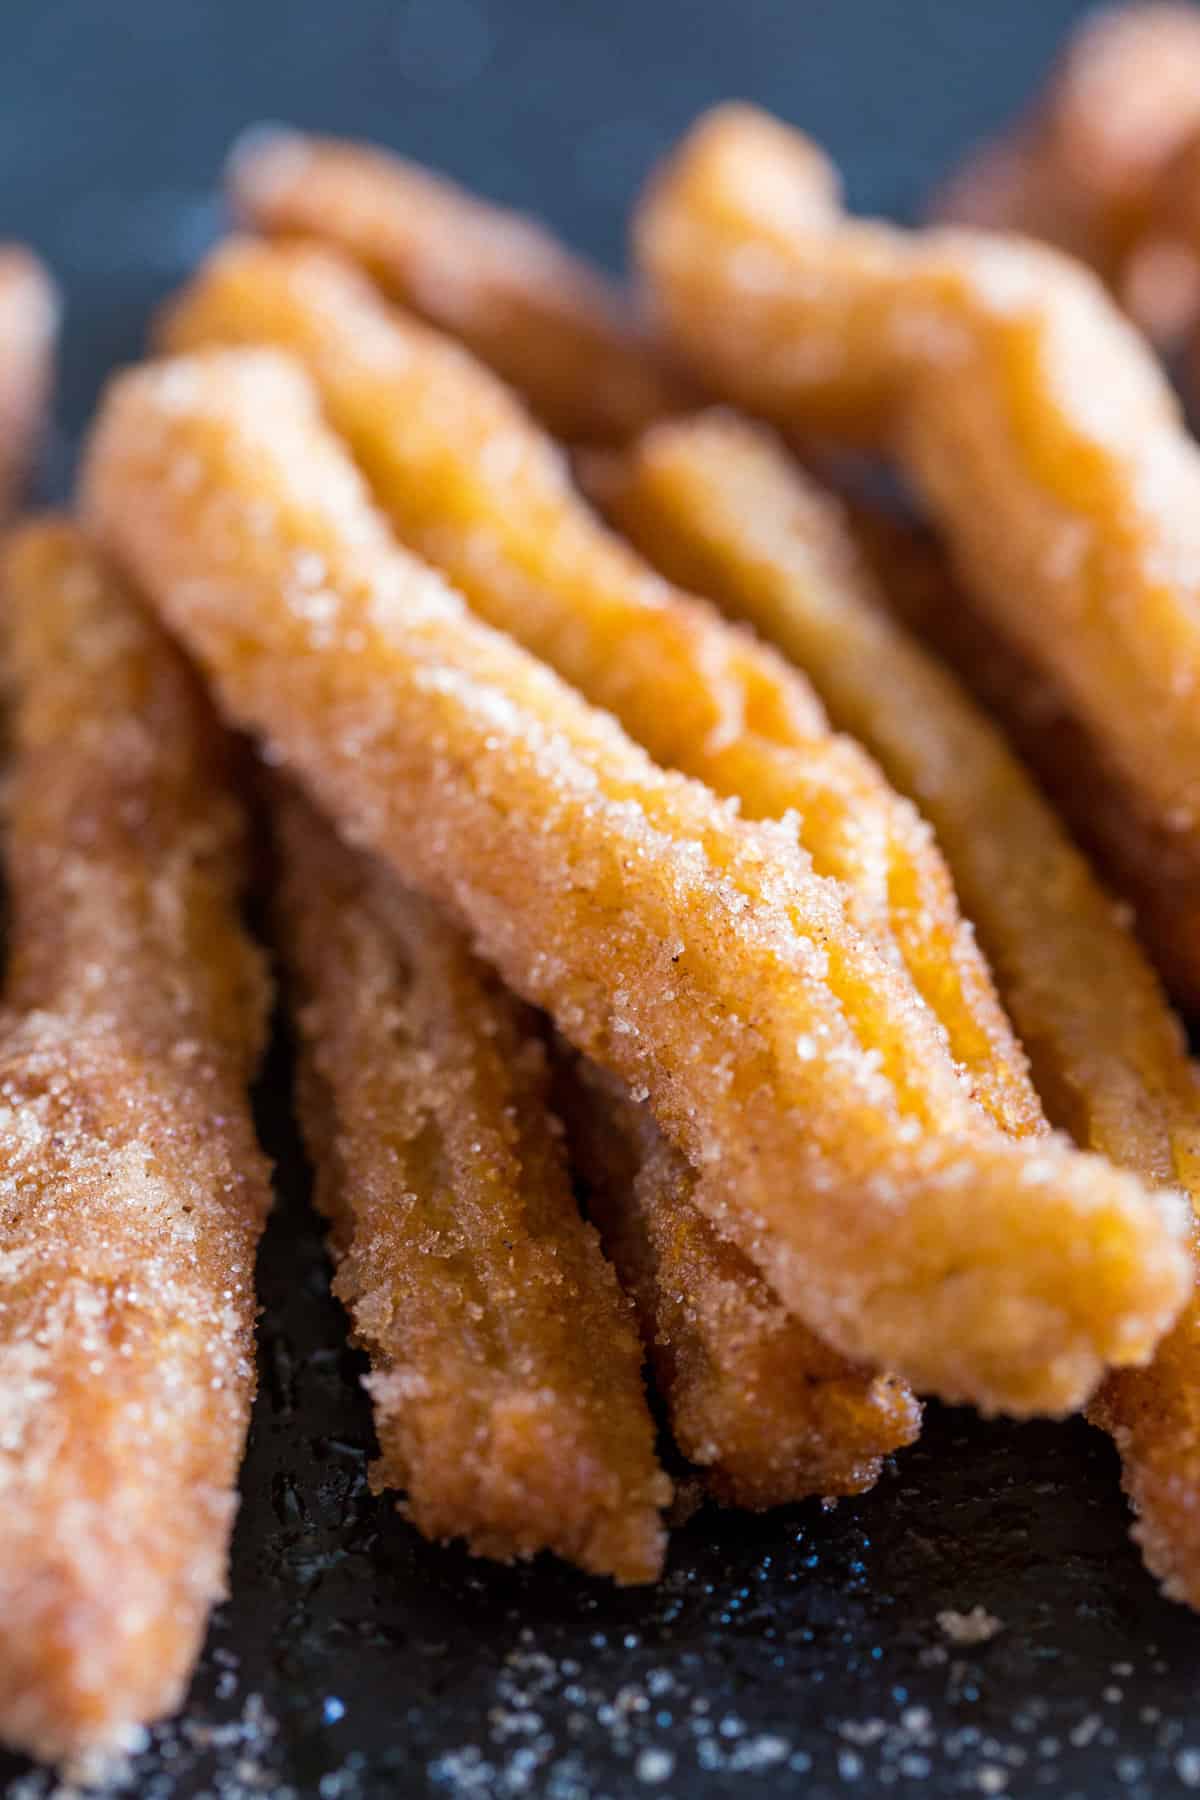 Homemade Mexican Churros Recipe with Dipping Sauces | Wanderzest